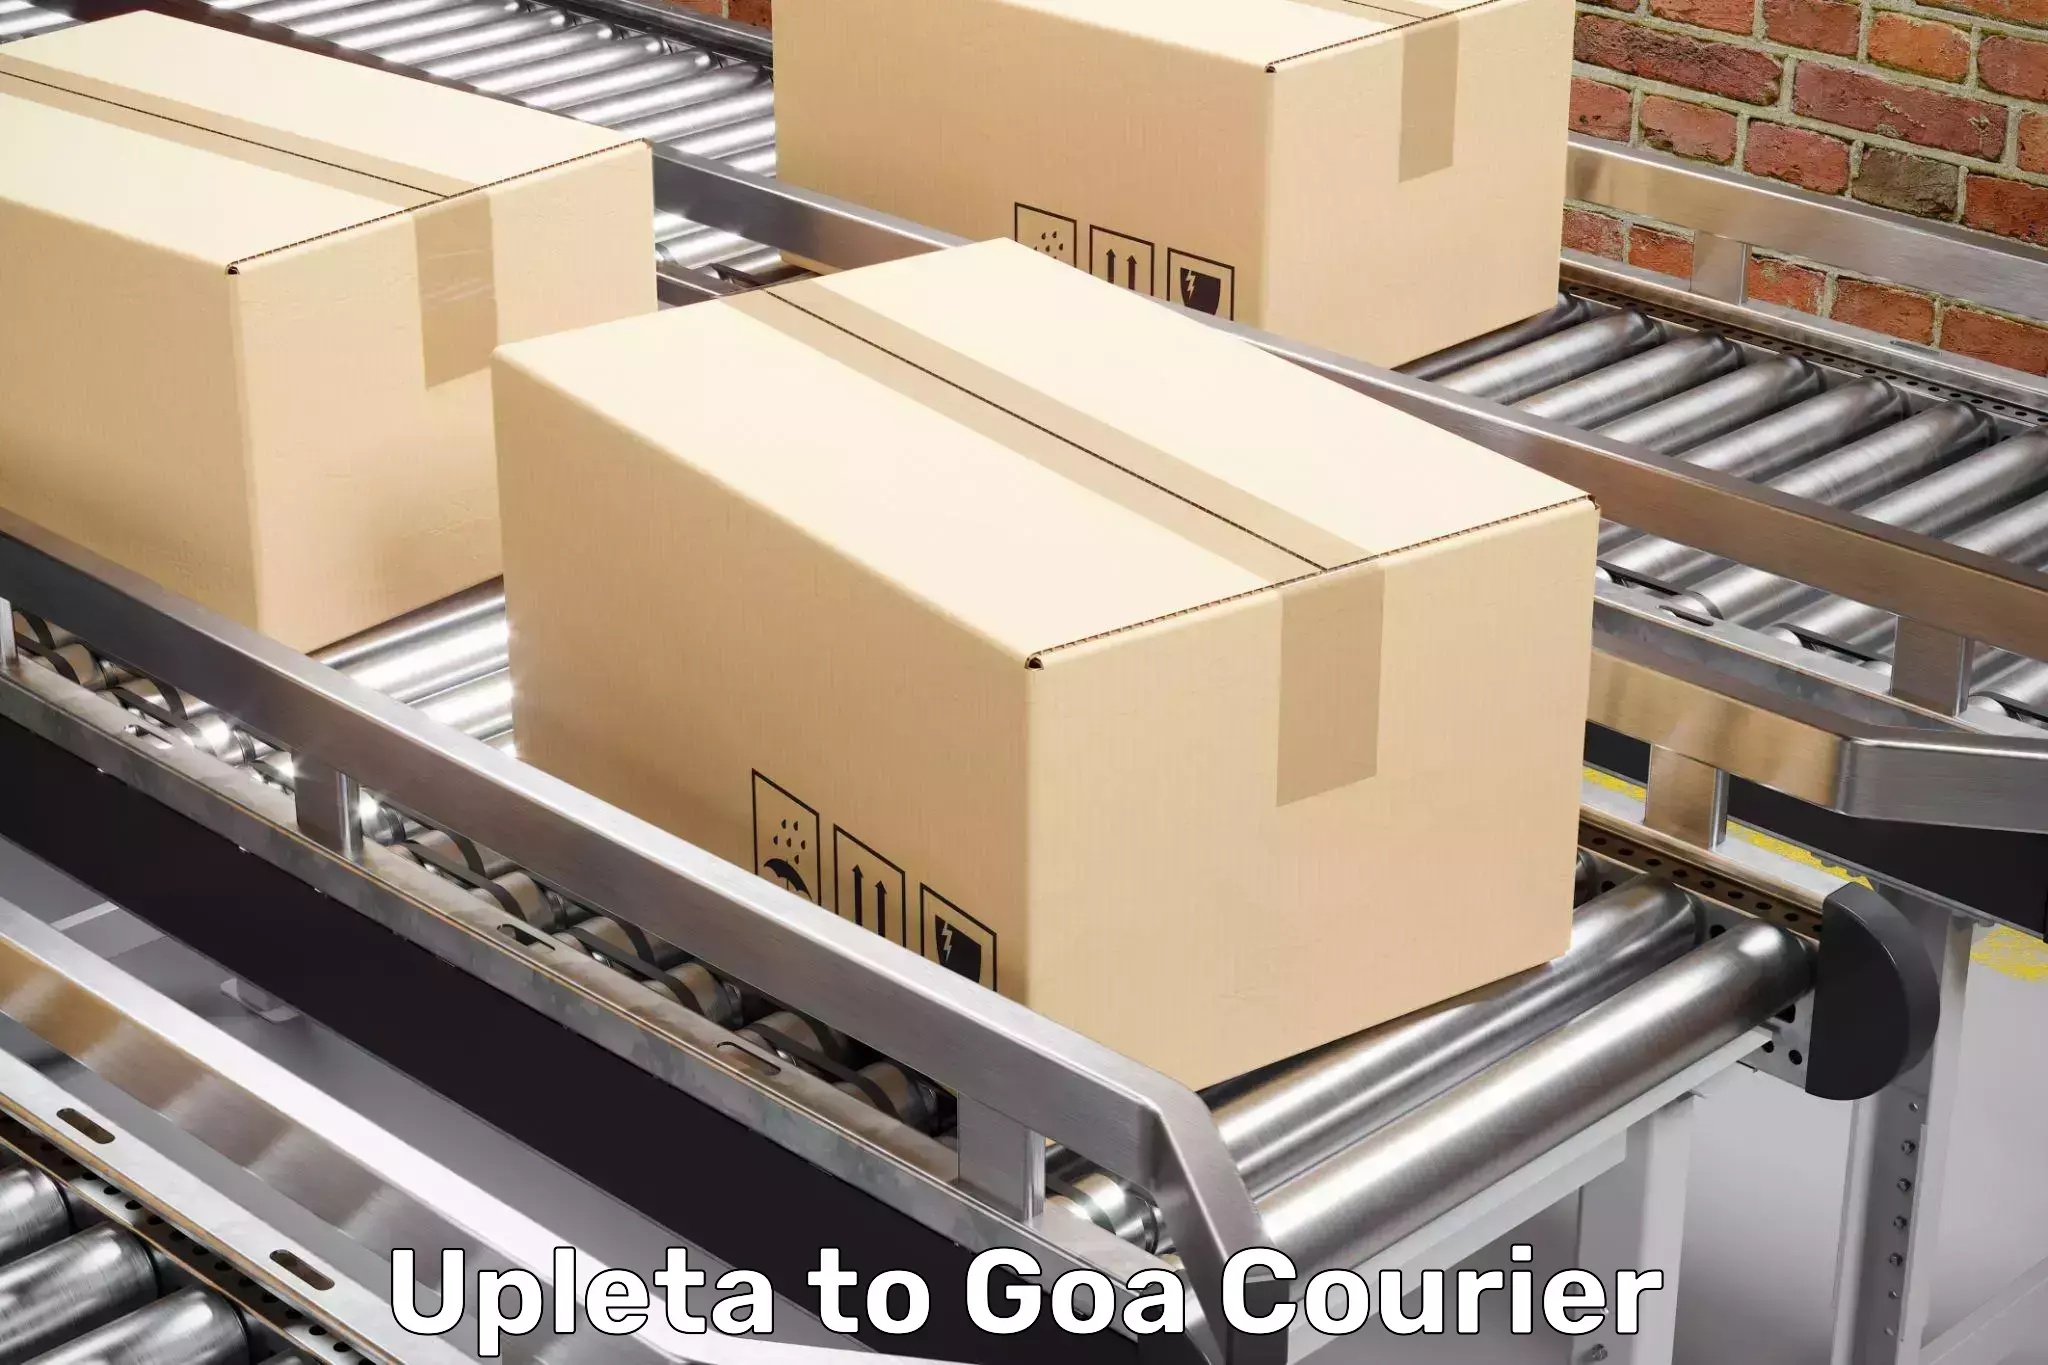 Moving and packing experts Upleta to Goa